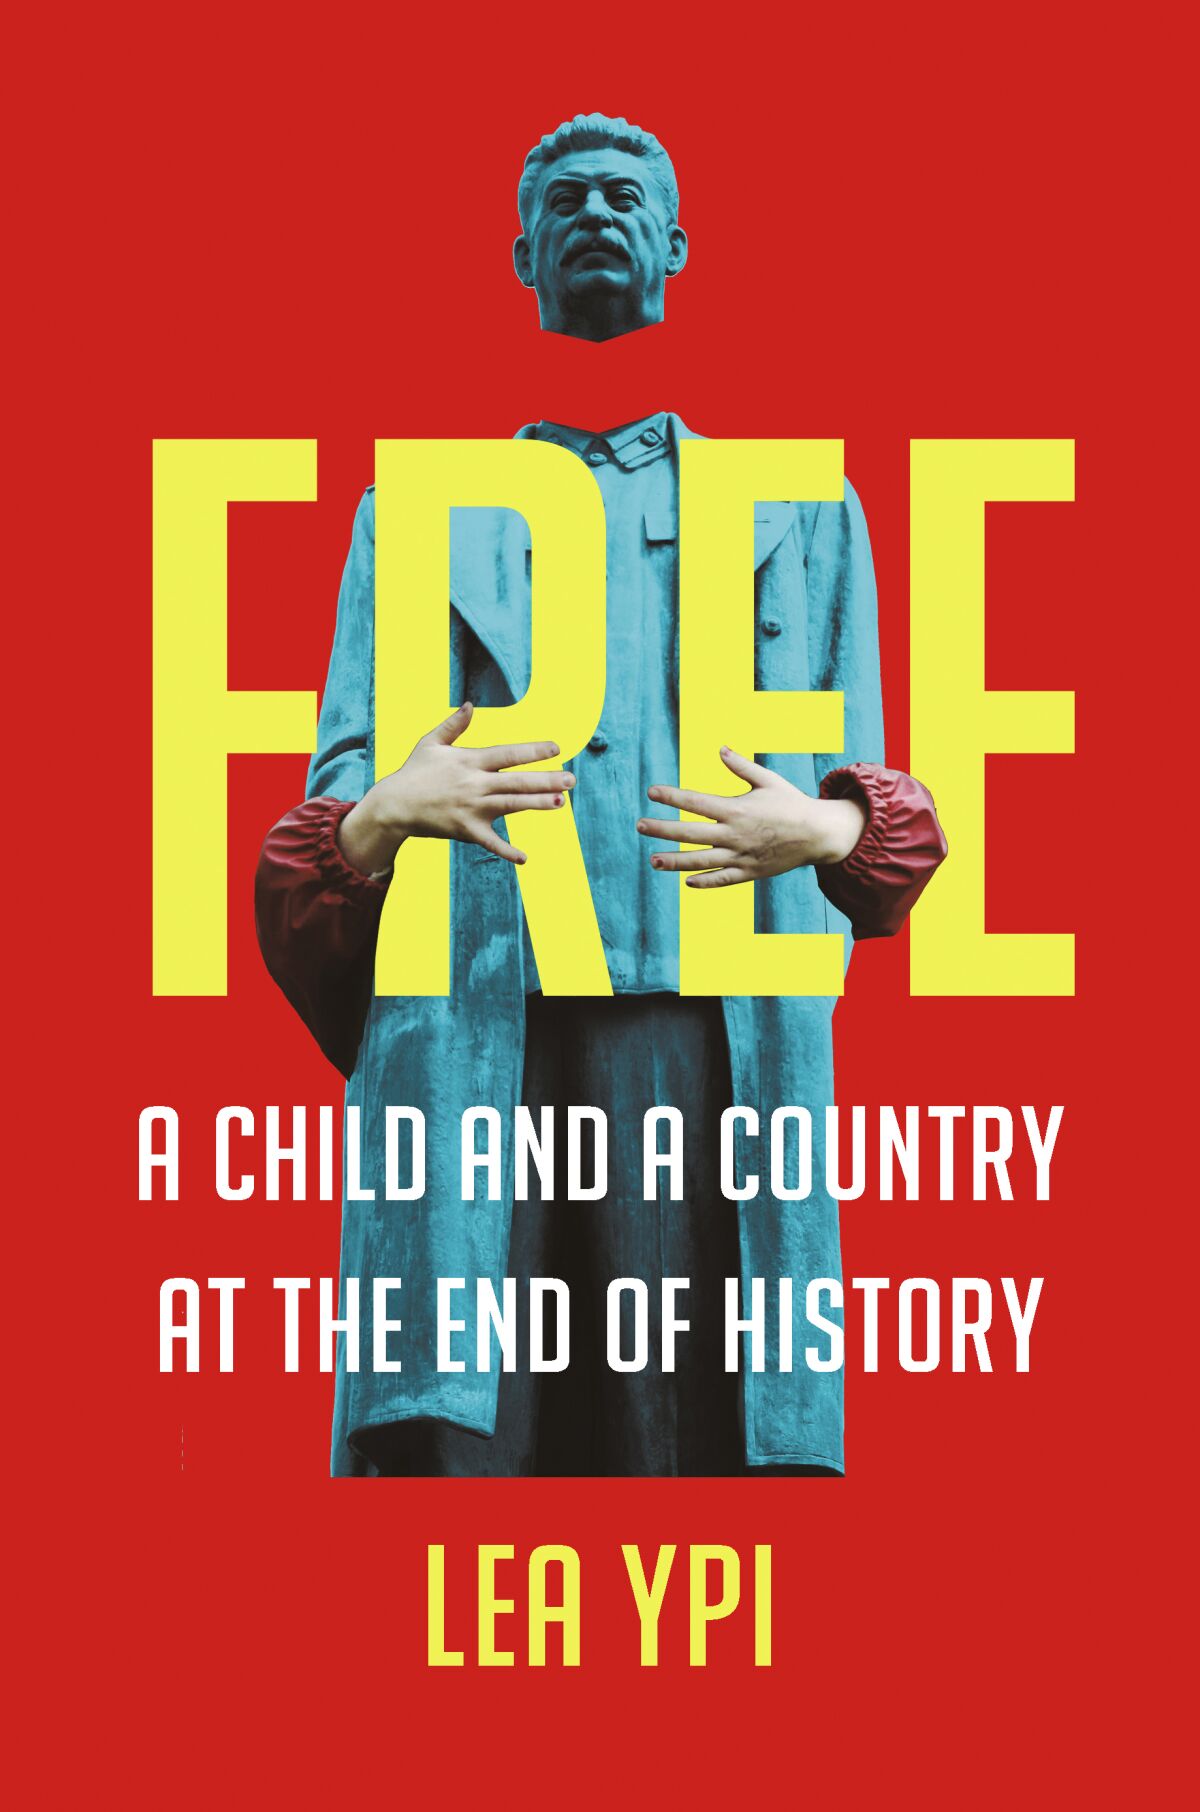 "Free: A Child and a Country at the End of History," by Lea Ypi